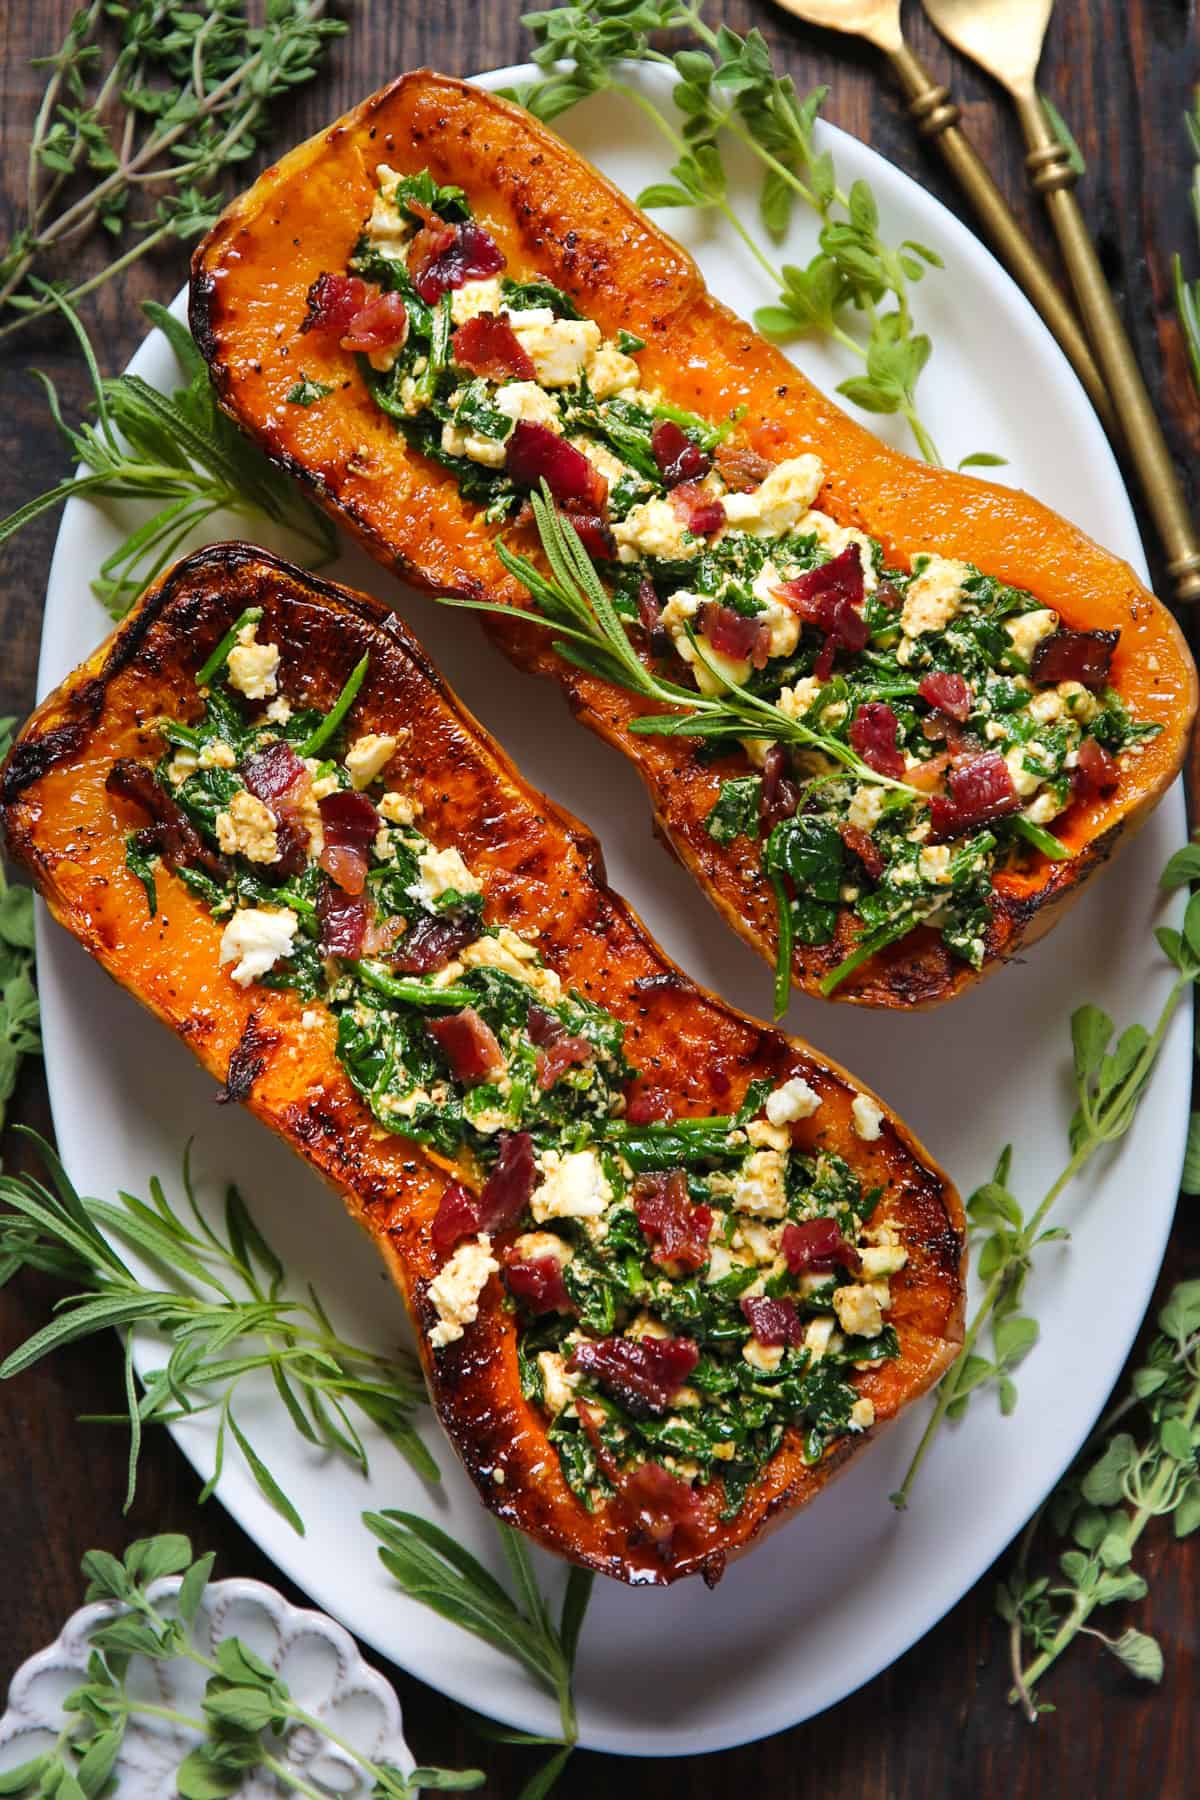 Stuffed Roasted Butternut Squash (2 halves) with Feta Cheese, Spinach, and Bacon - on a white platter.